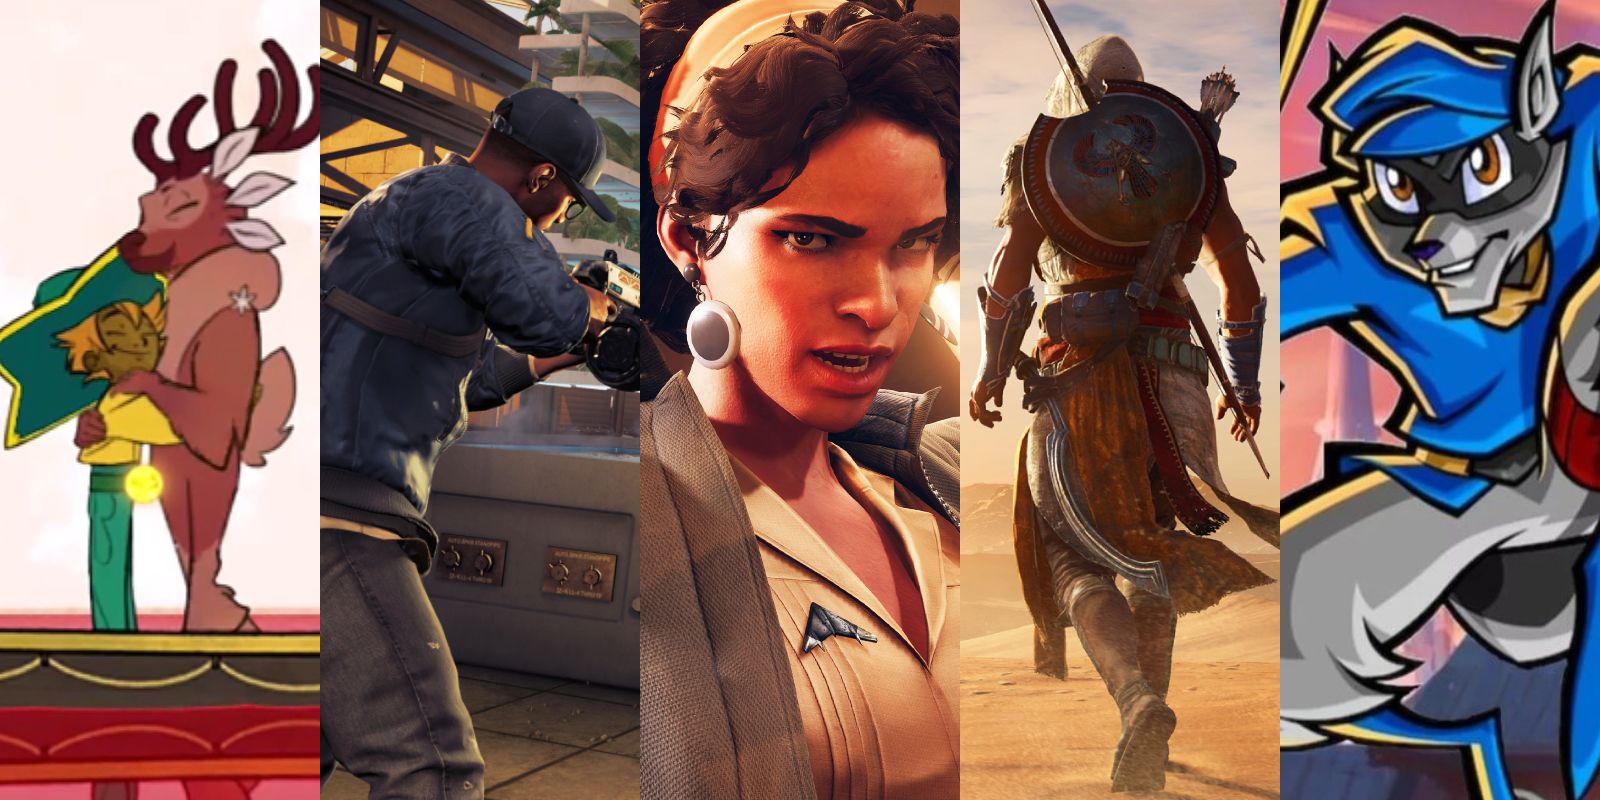 PlayStation on X: The PlayStation Plus Monthly Games and Game Catalog  lineup for September has been revealed. Highlights include Need for Speed  Heat, Toem, Deathloop and Assassin's Creed Origins. Get a preview